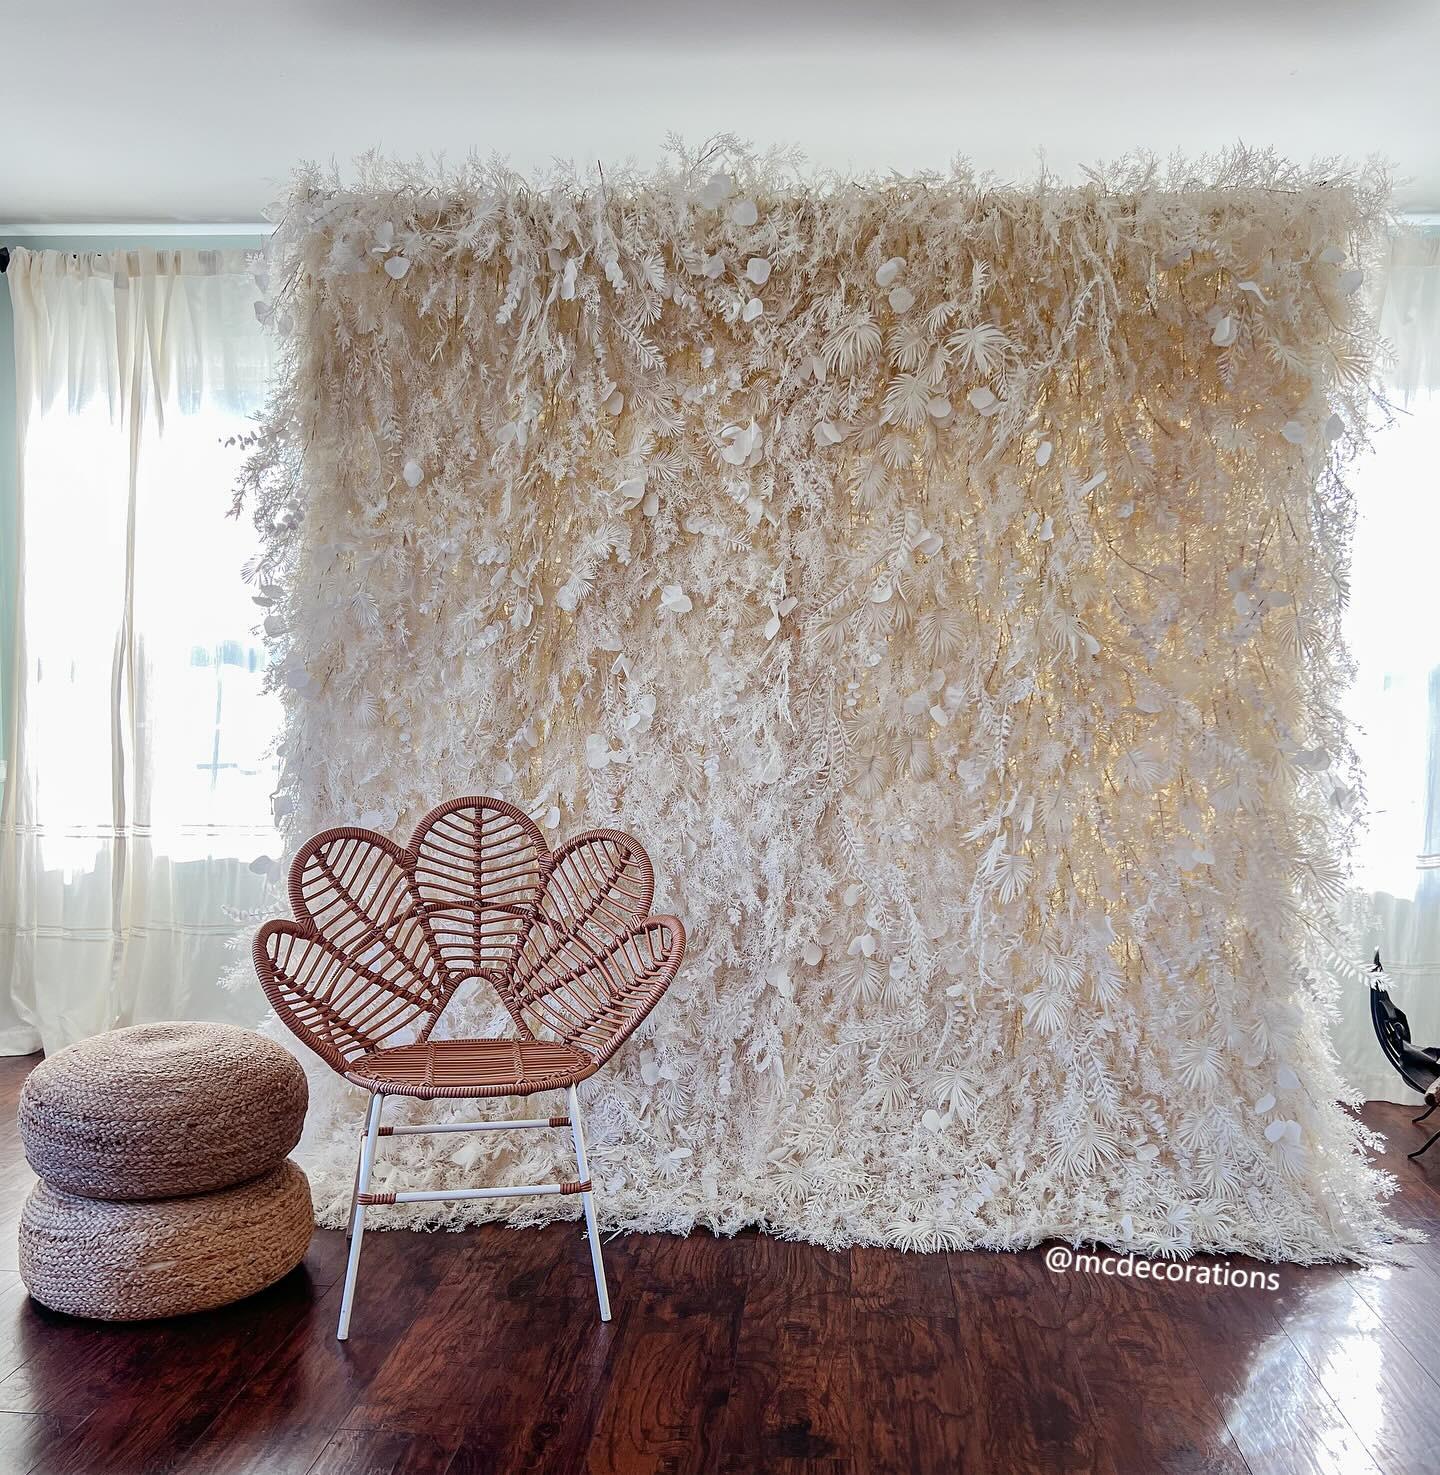 The white pampas fabric artificial flower wall looks pure and elegant.